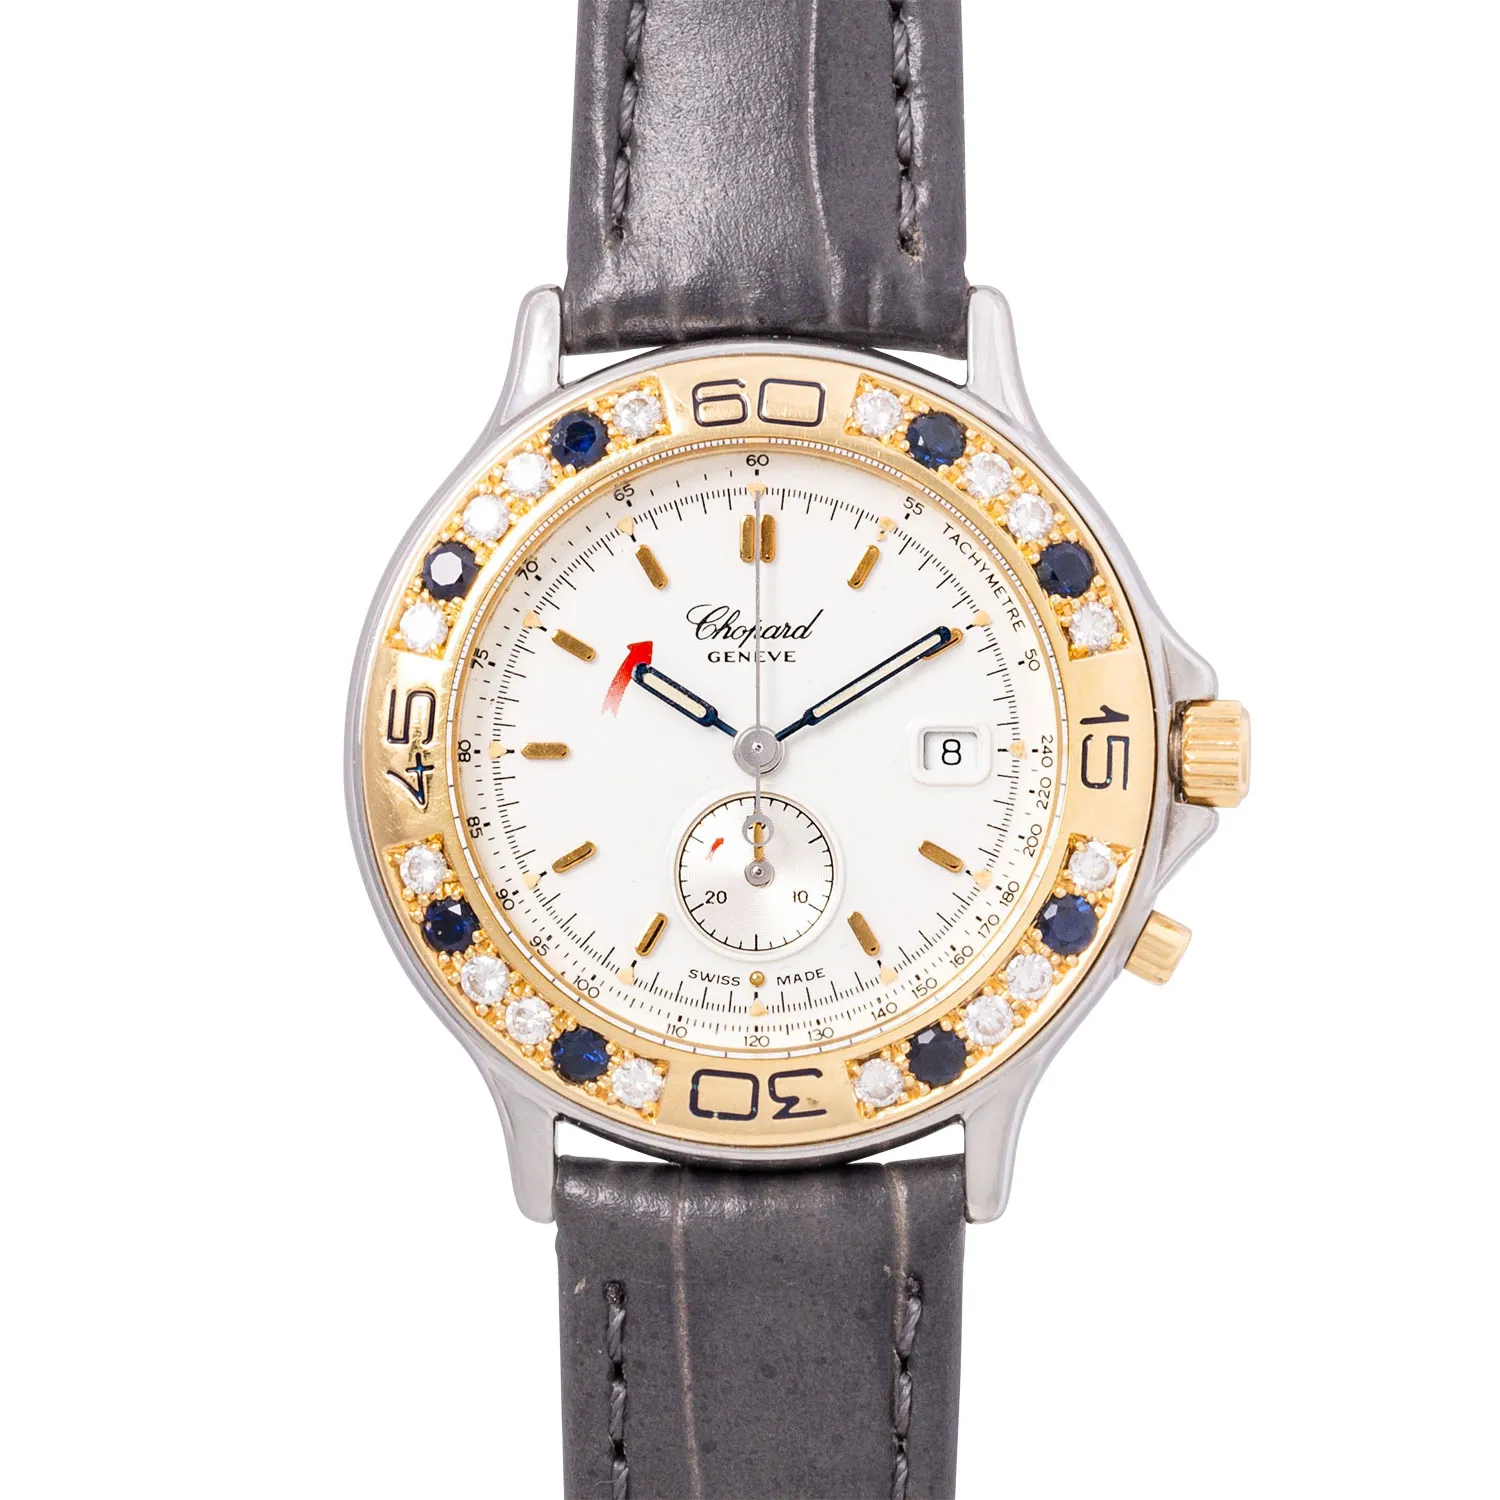 Chopard Mille Miglia 8175 31mm Stainless steel, yellow gold, diamon and sapphire-set